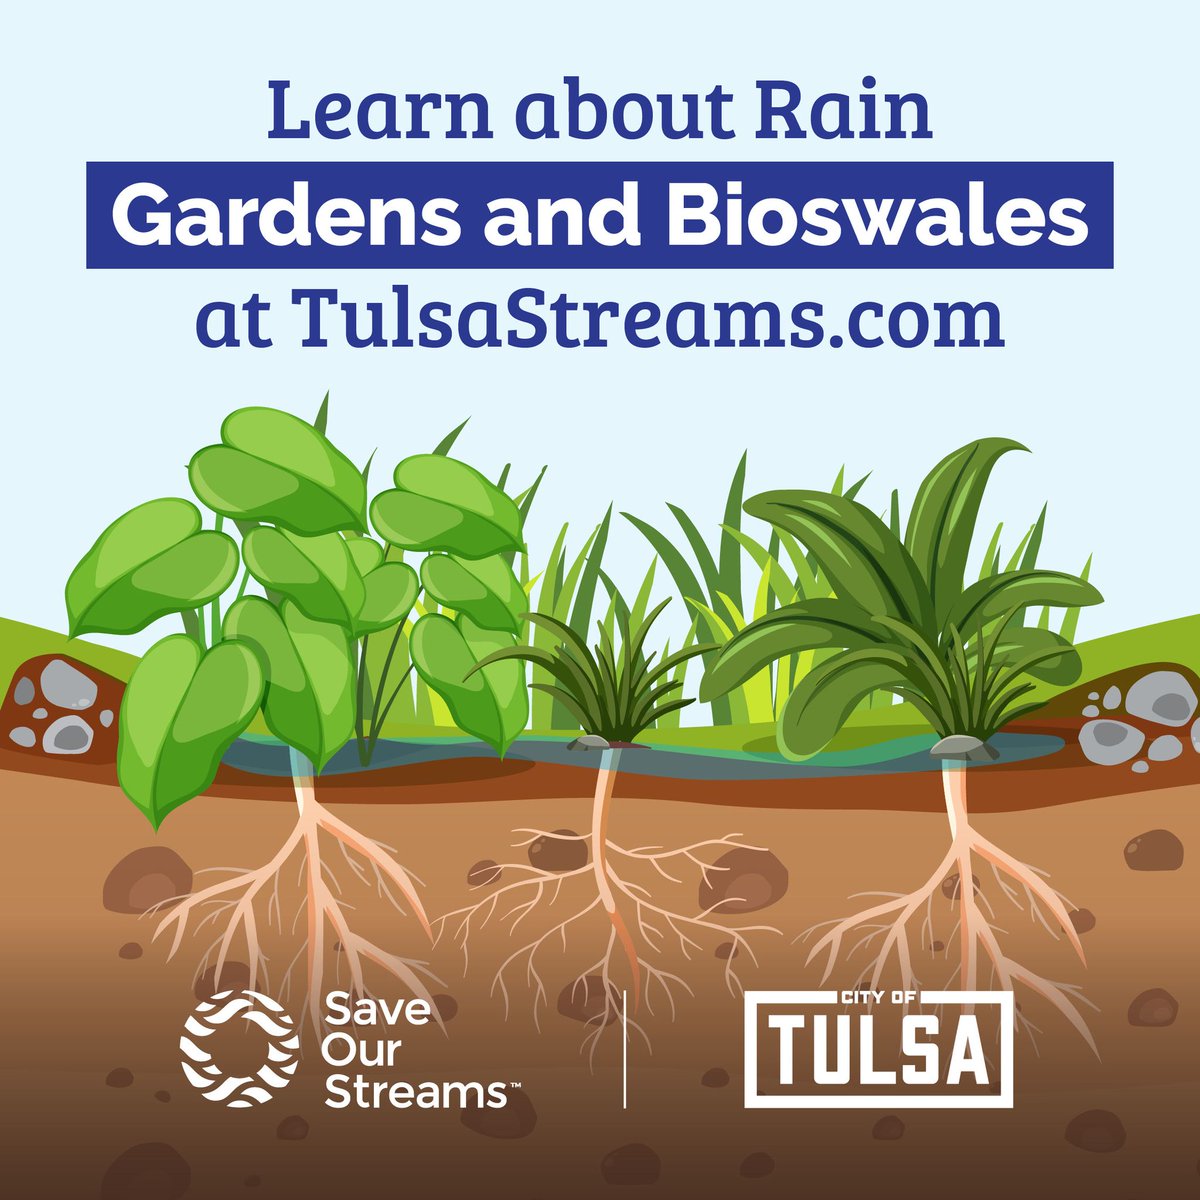 Rain Gardens and Bioswales not only add visual appeal to your property but also play a crucial role in managing stormwater, protecting aquatic ecosystems, and reducing erosion. Learn more about Low Impact Development at cityoftulsa.org/LID. #Tulsa #SOS